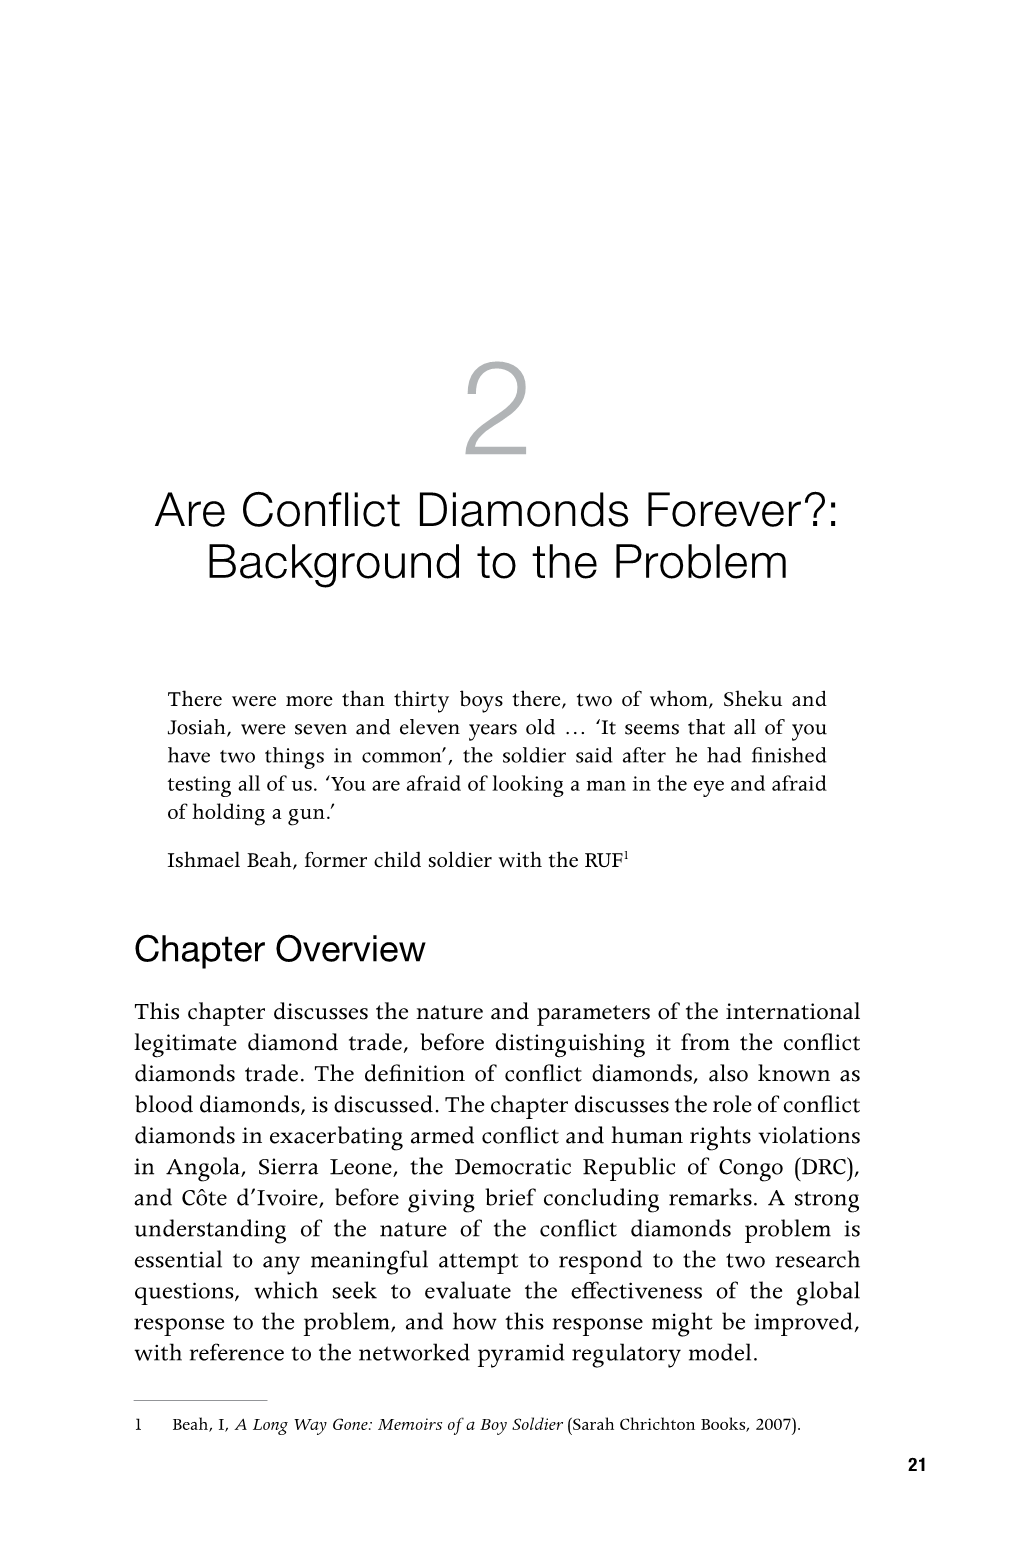 Are Conflict Diamonds Forever?: Background to the Problem